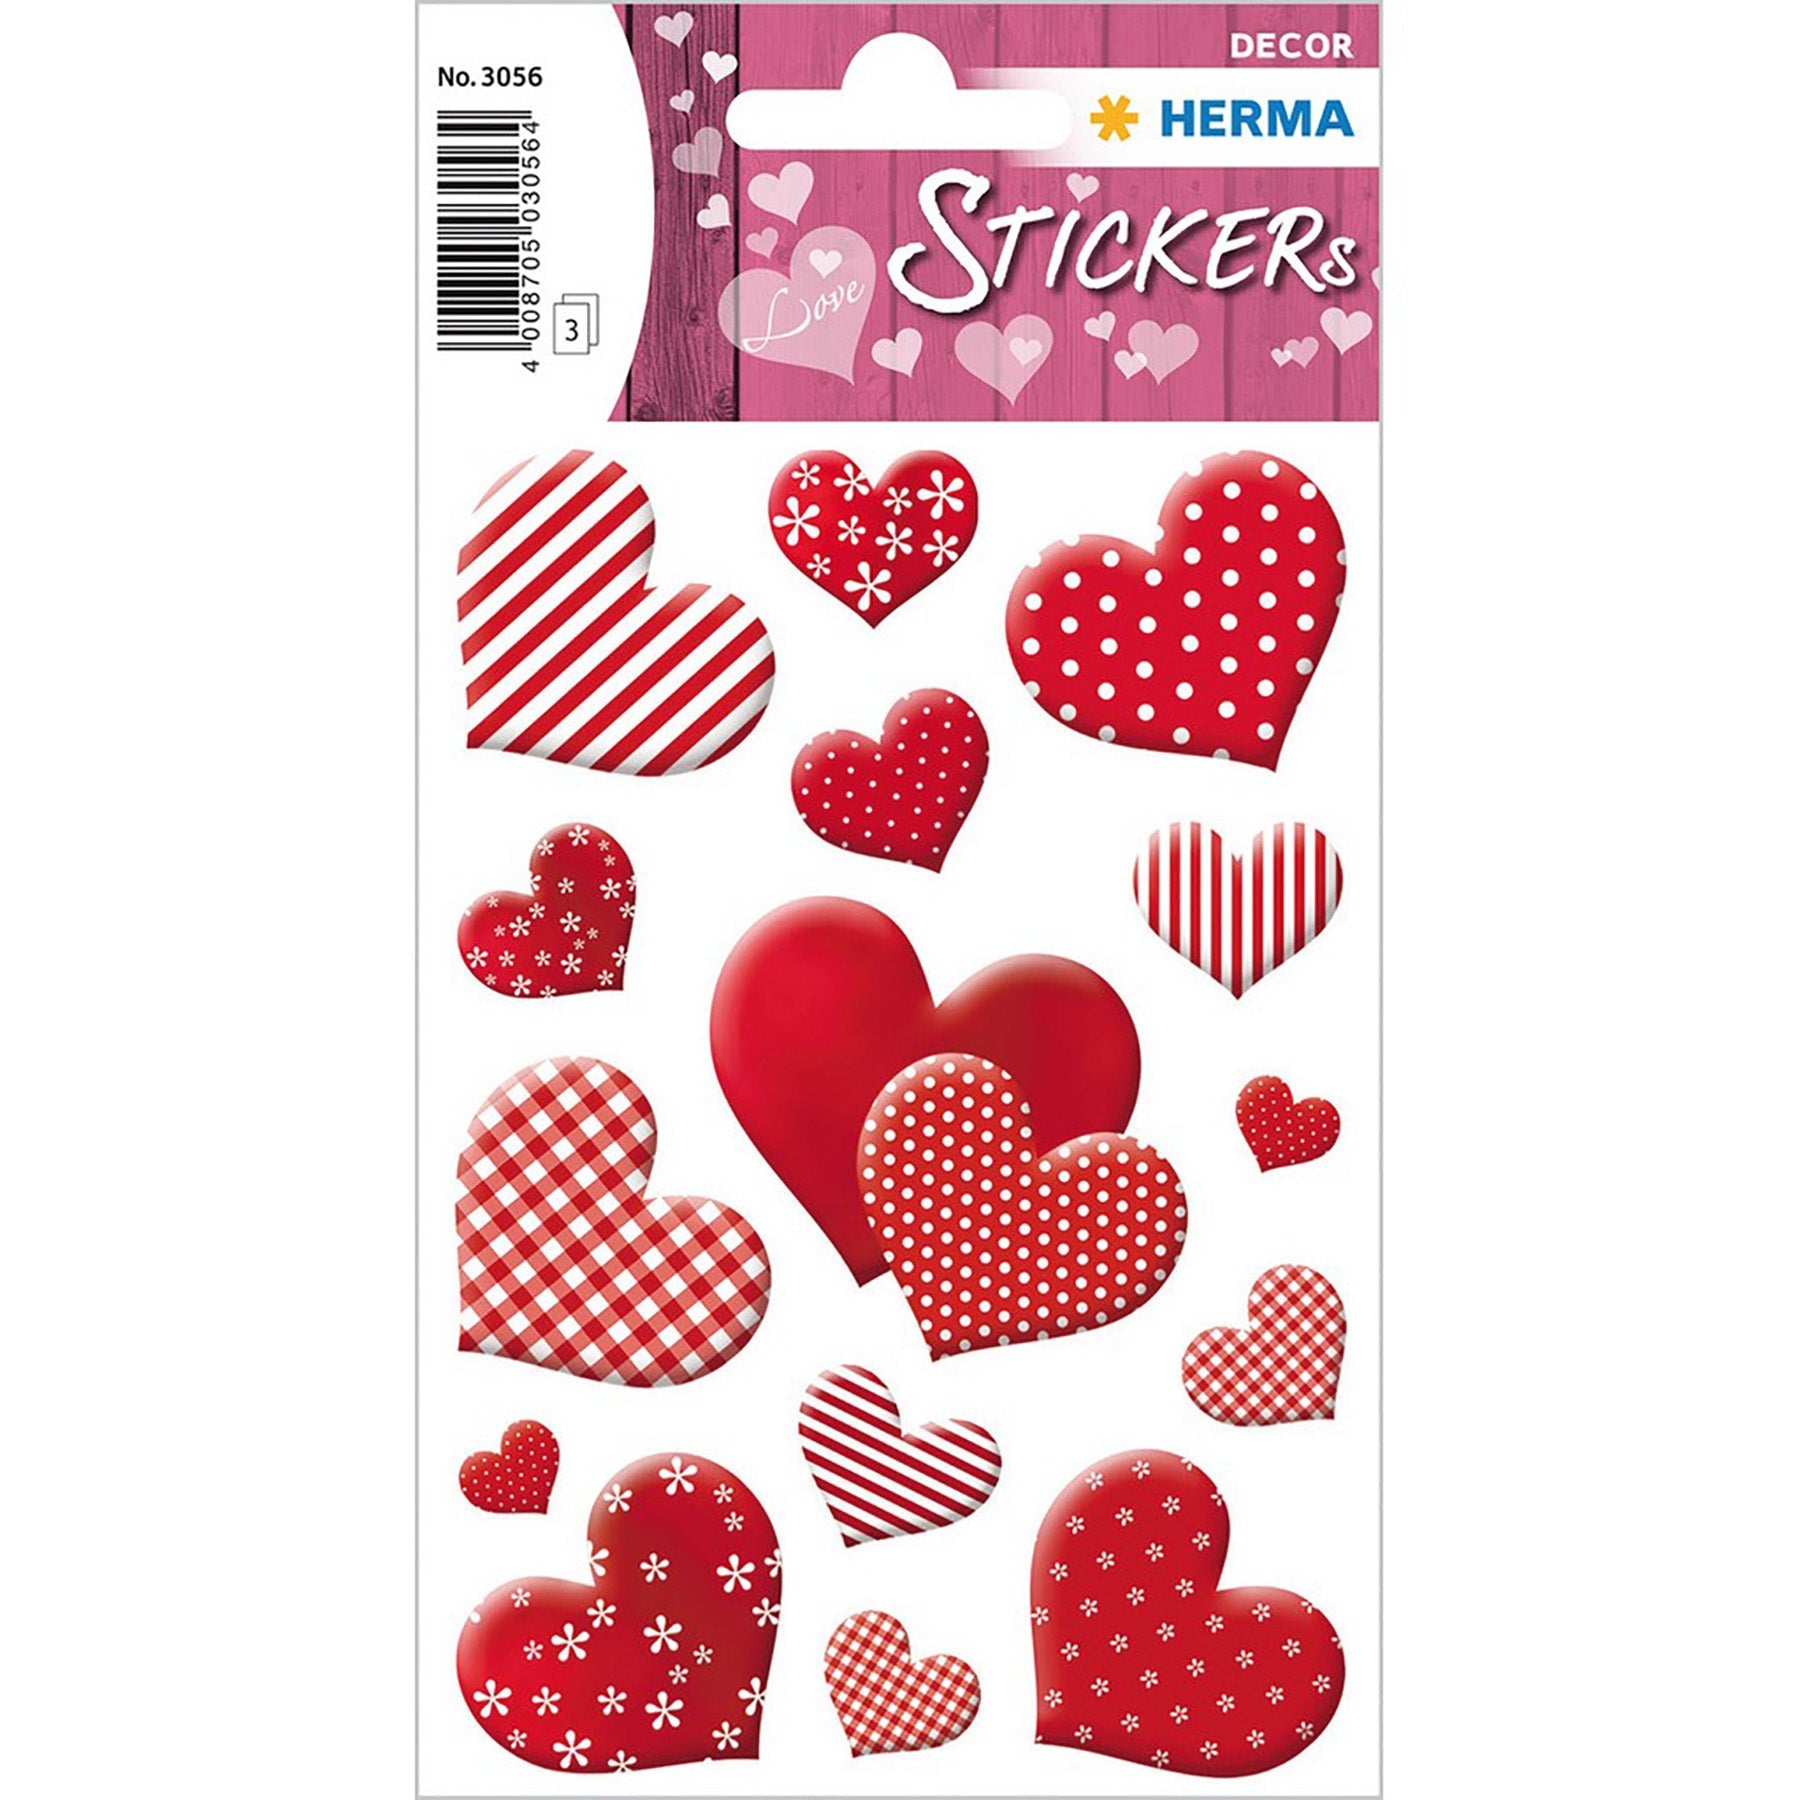 Herma Decor 3 Sheets Stickers Printed Red Hearts 4.75x3.1in Sheet